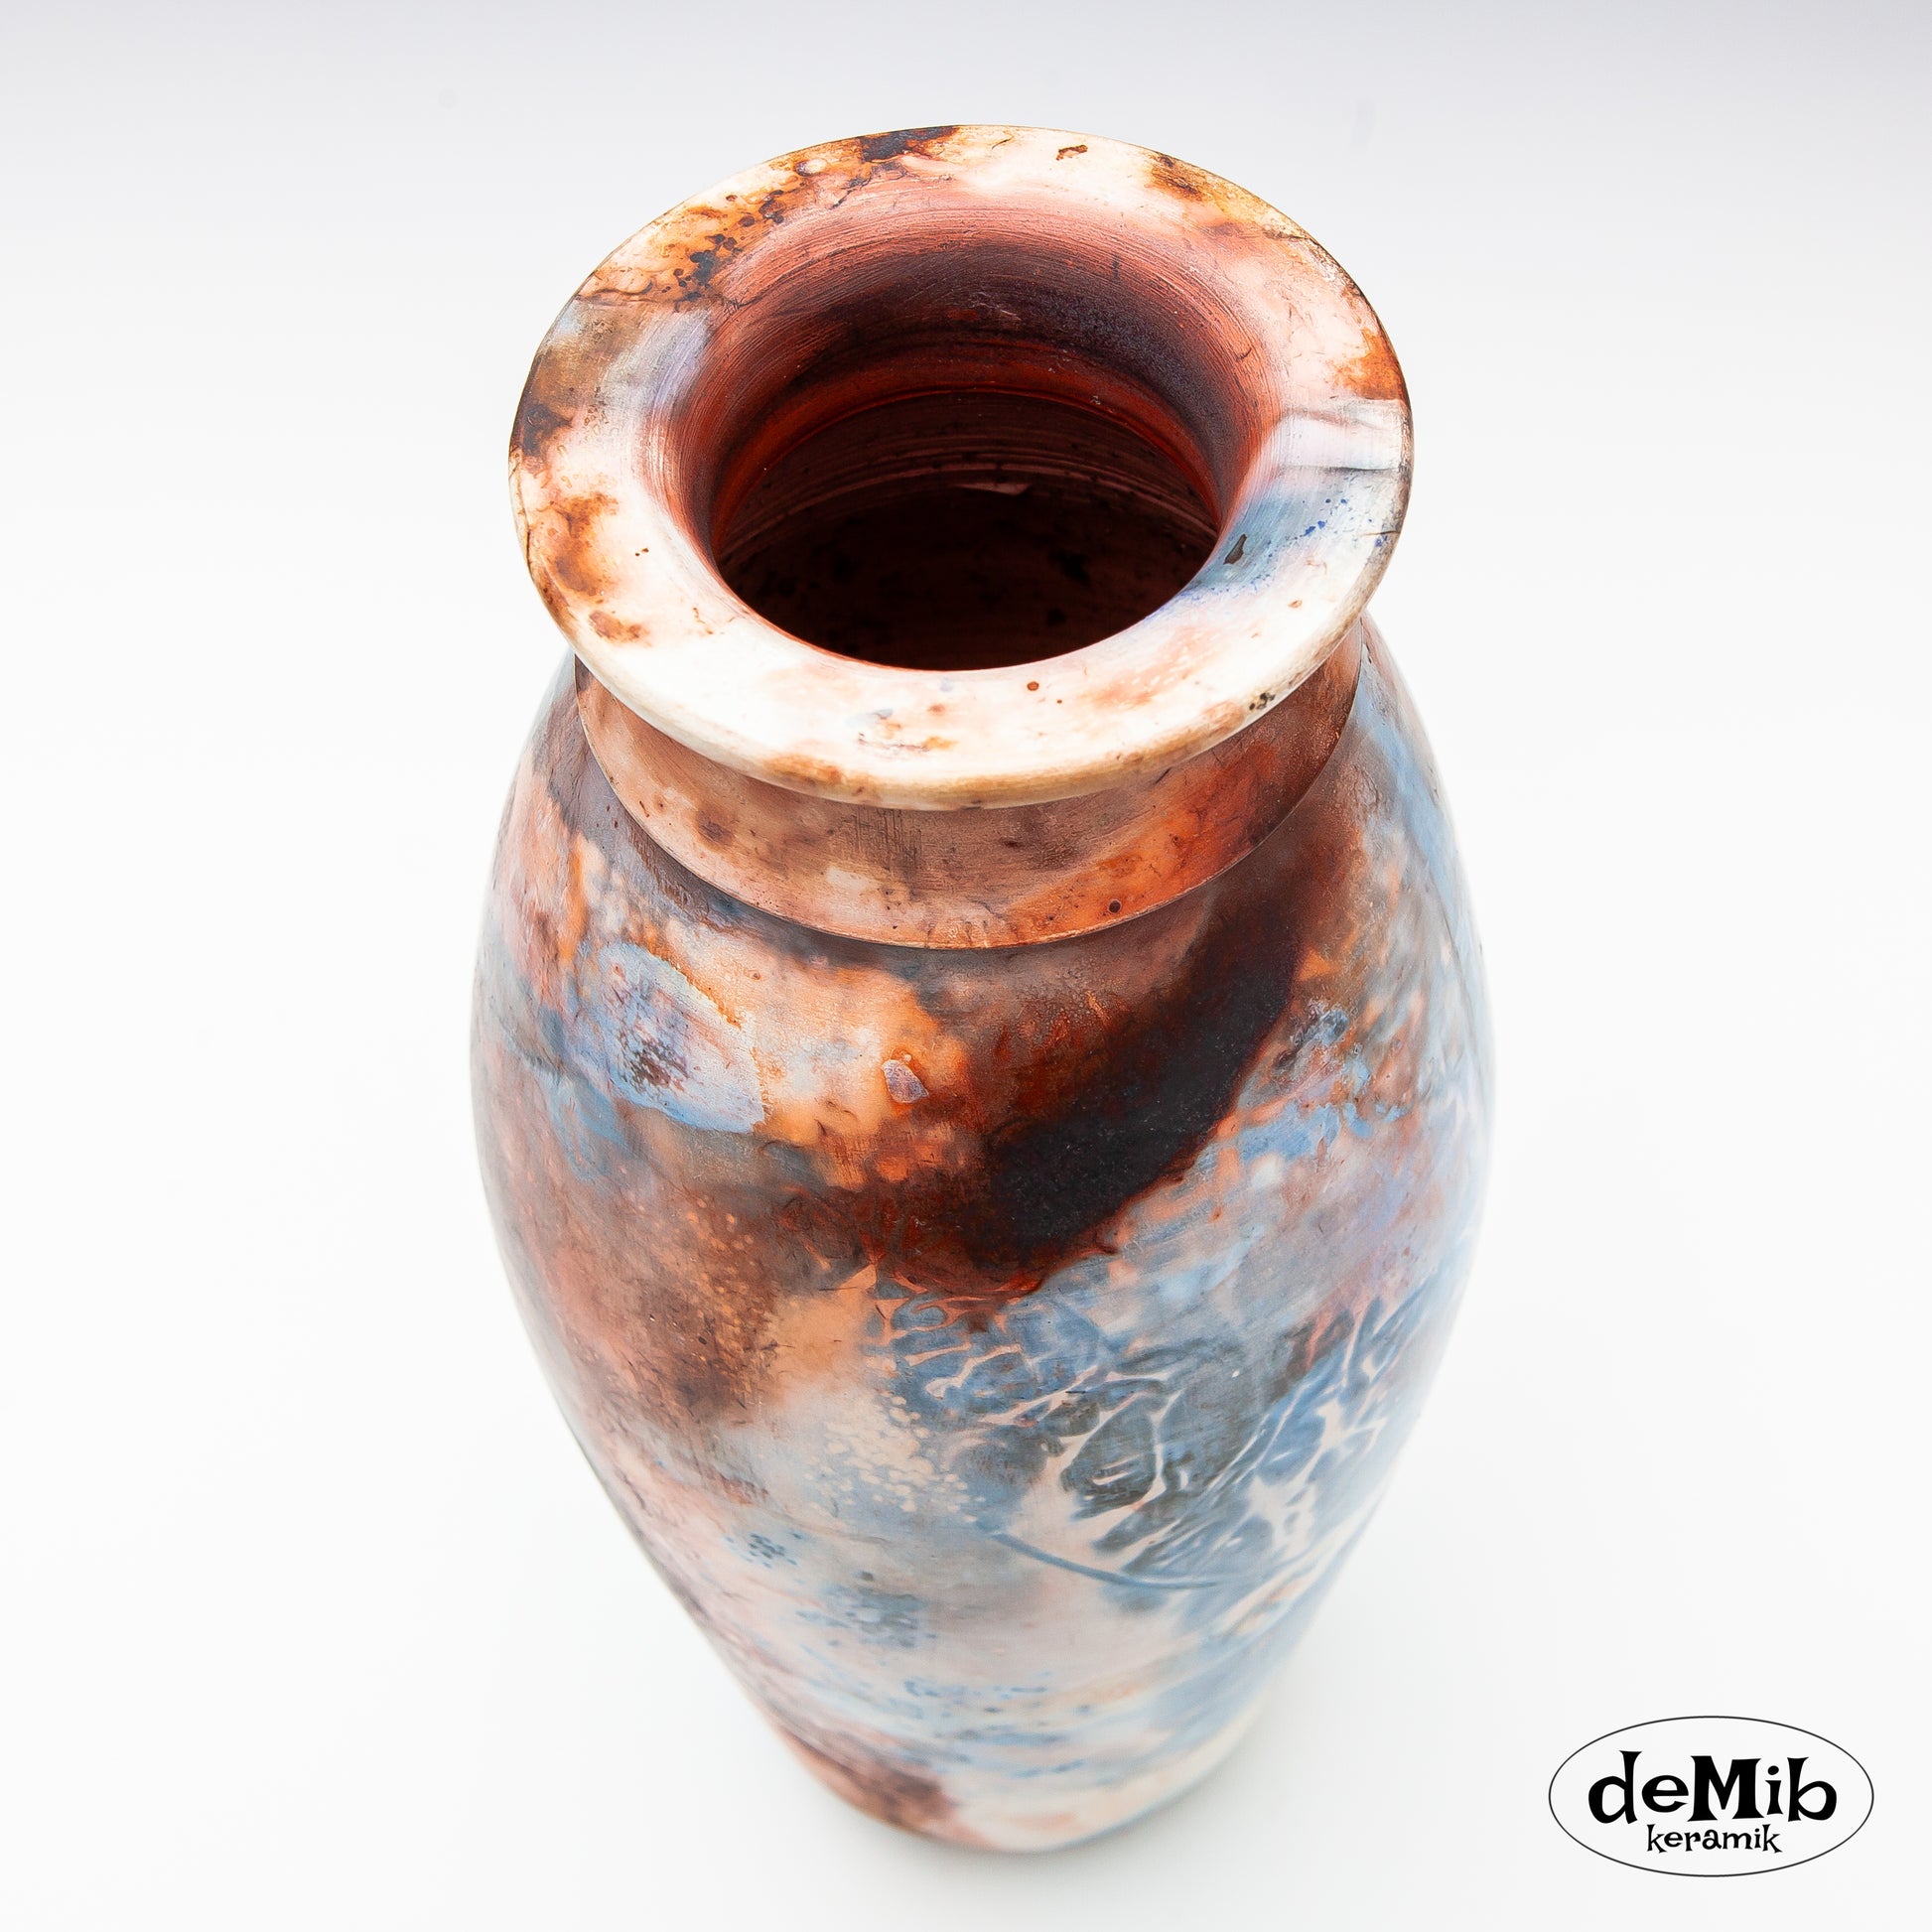 Tall Pitfired Vase in Blue & Red (40 cm)